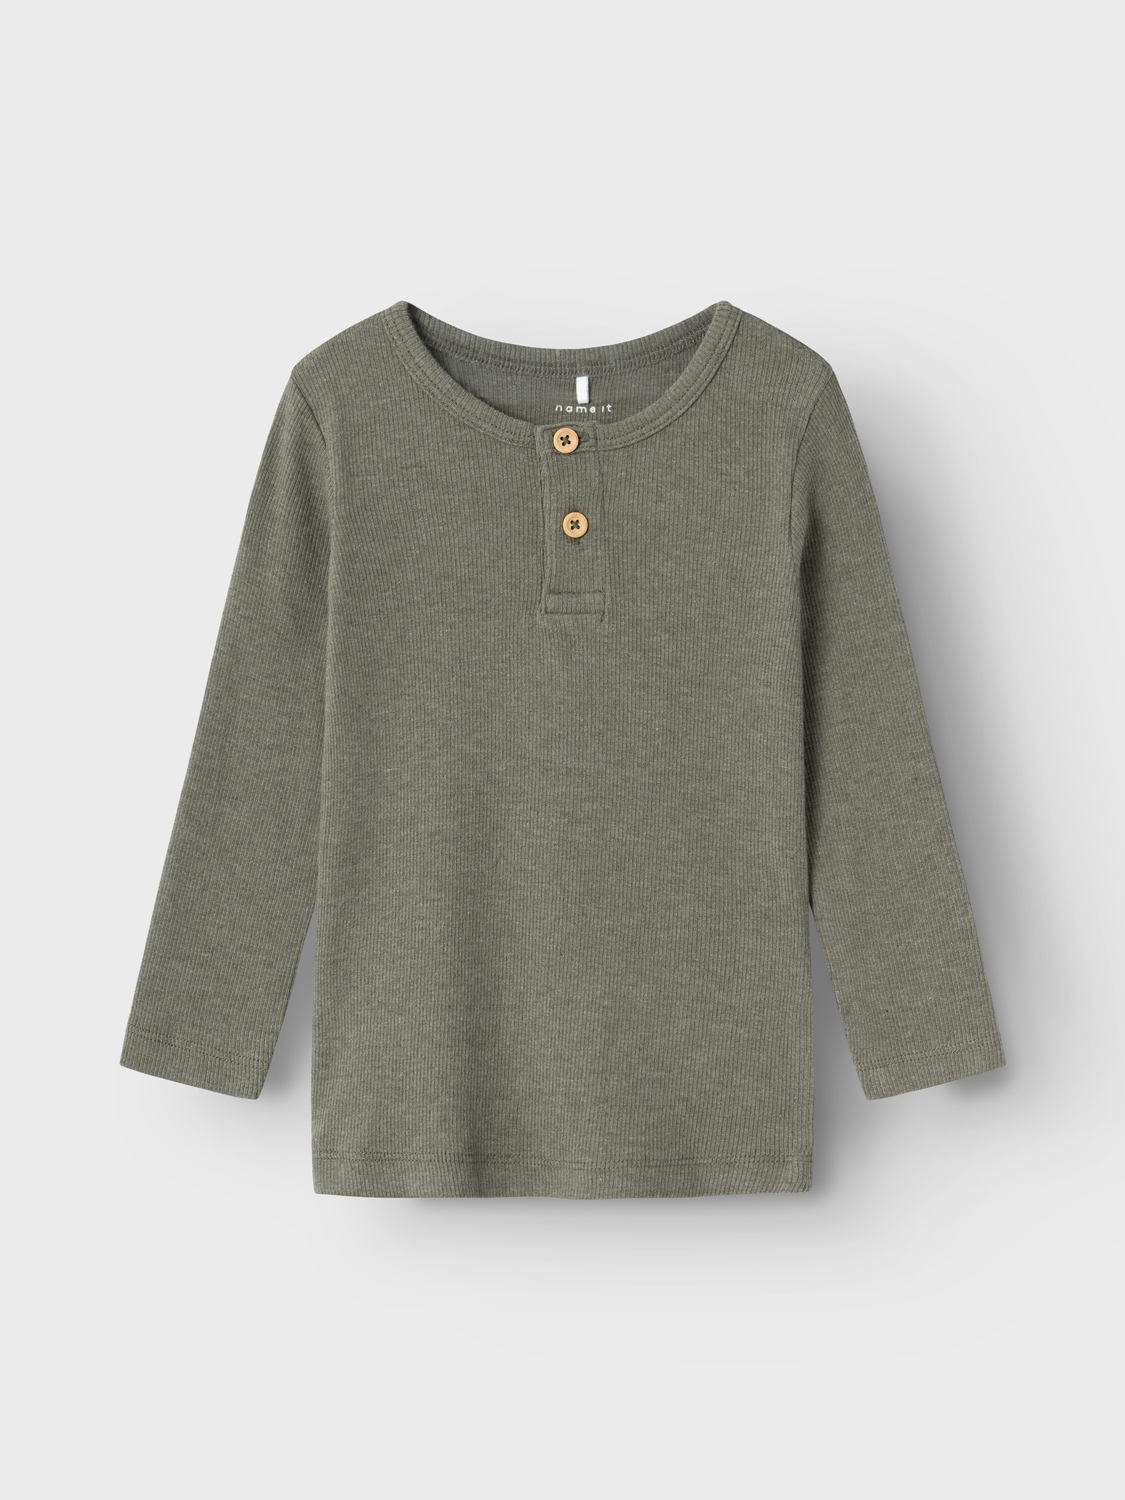 NMMKAB T-Shirts & Tops - Dusty Olive